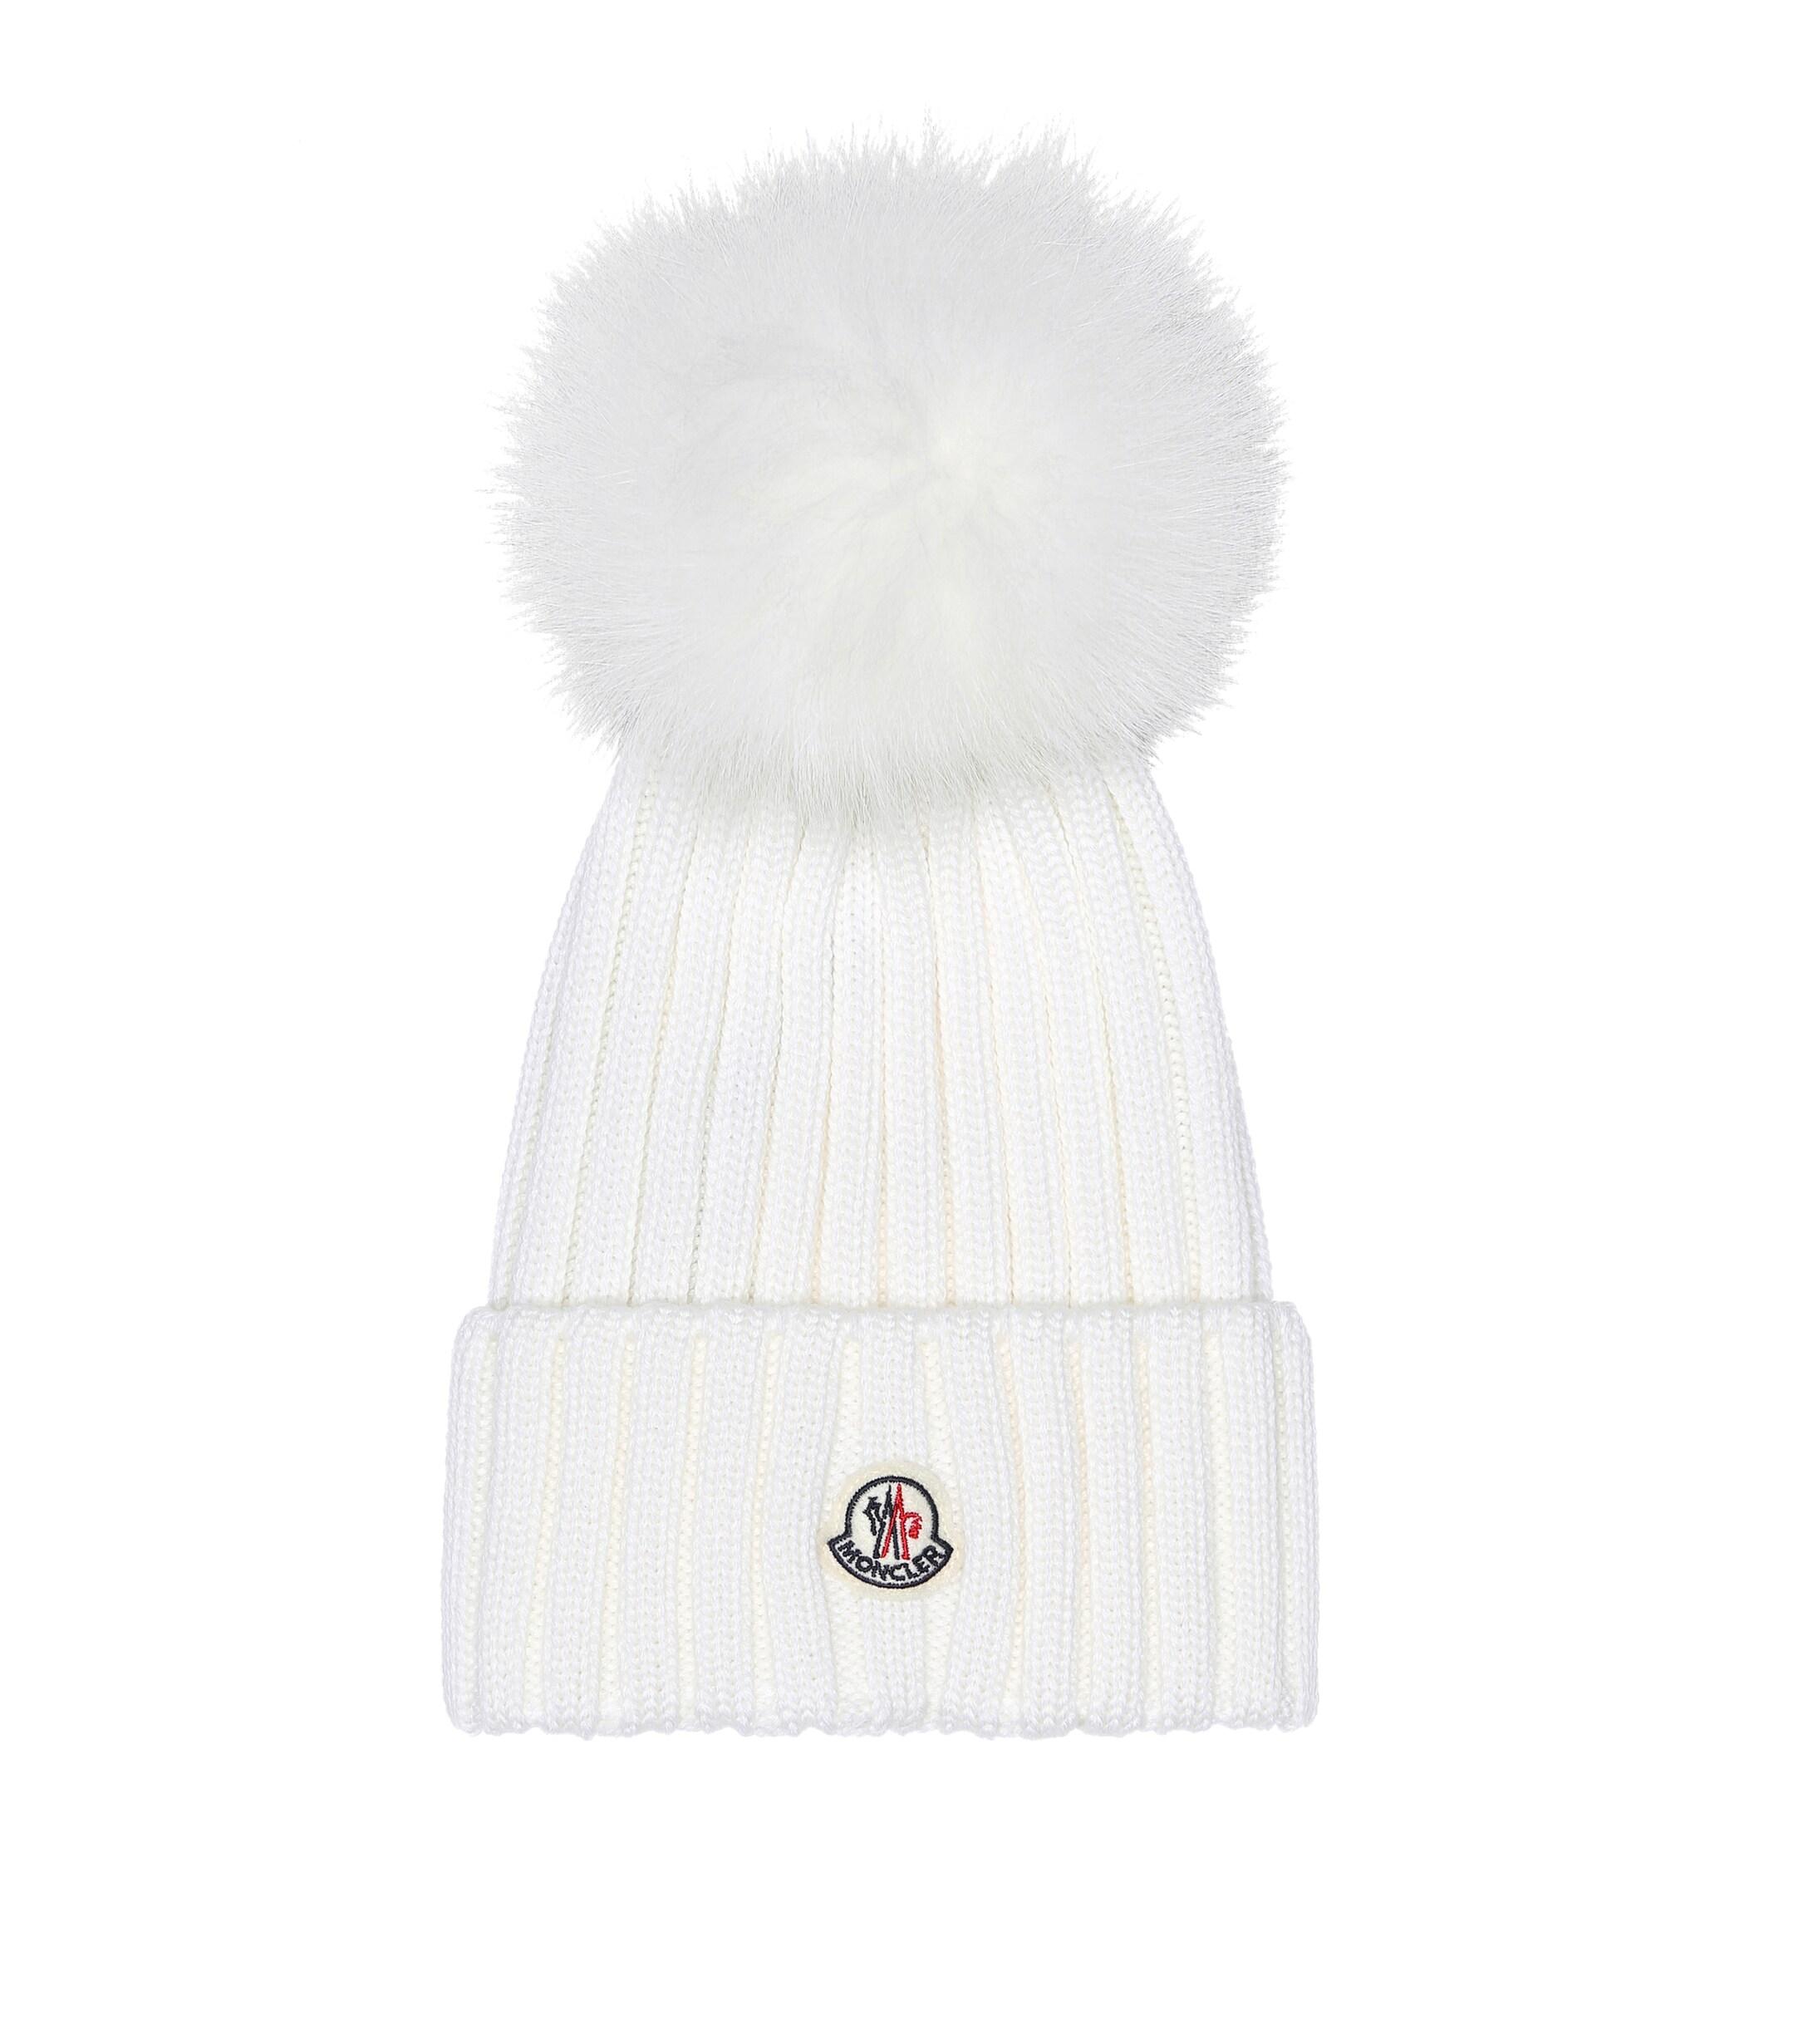 Moncler Fur-trimmed Wool Beanie in White - Lyst